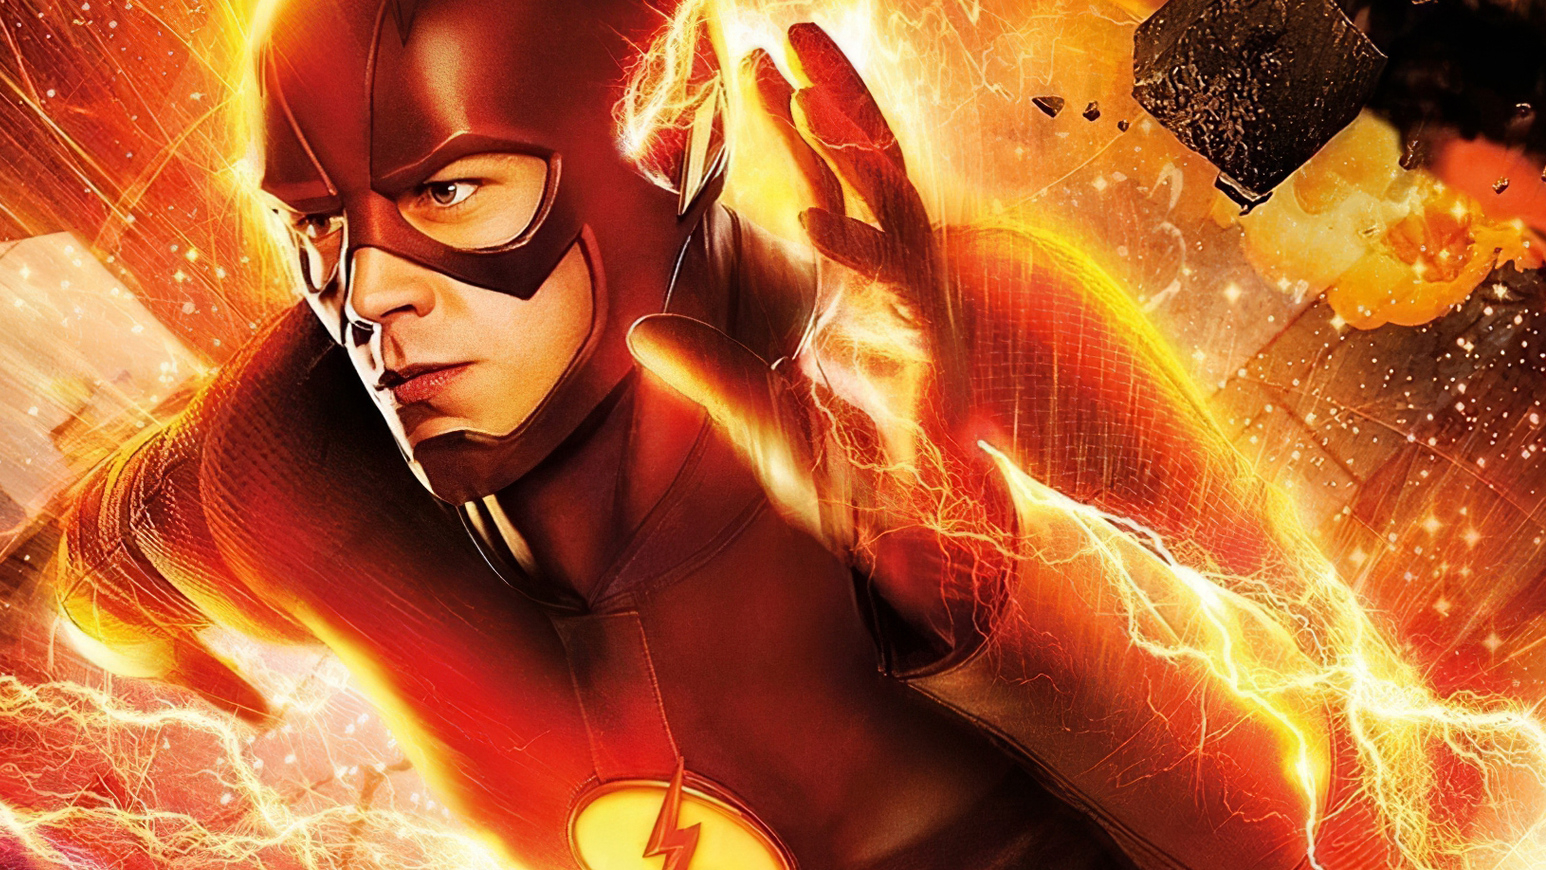 Fans Want Grant Gustin To Replace Ezra Miller In The Flash - Giant Freakin Robot